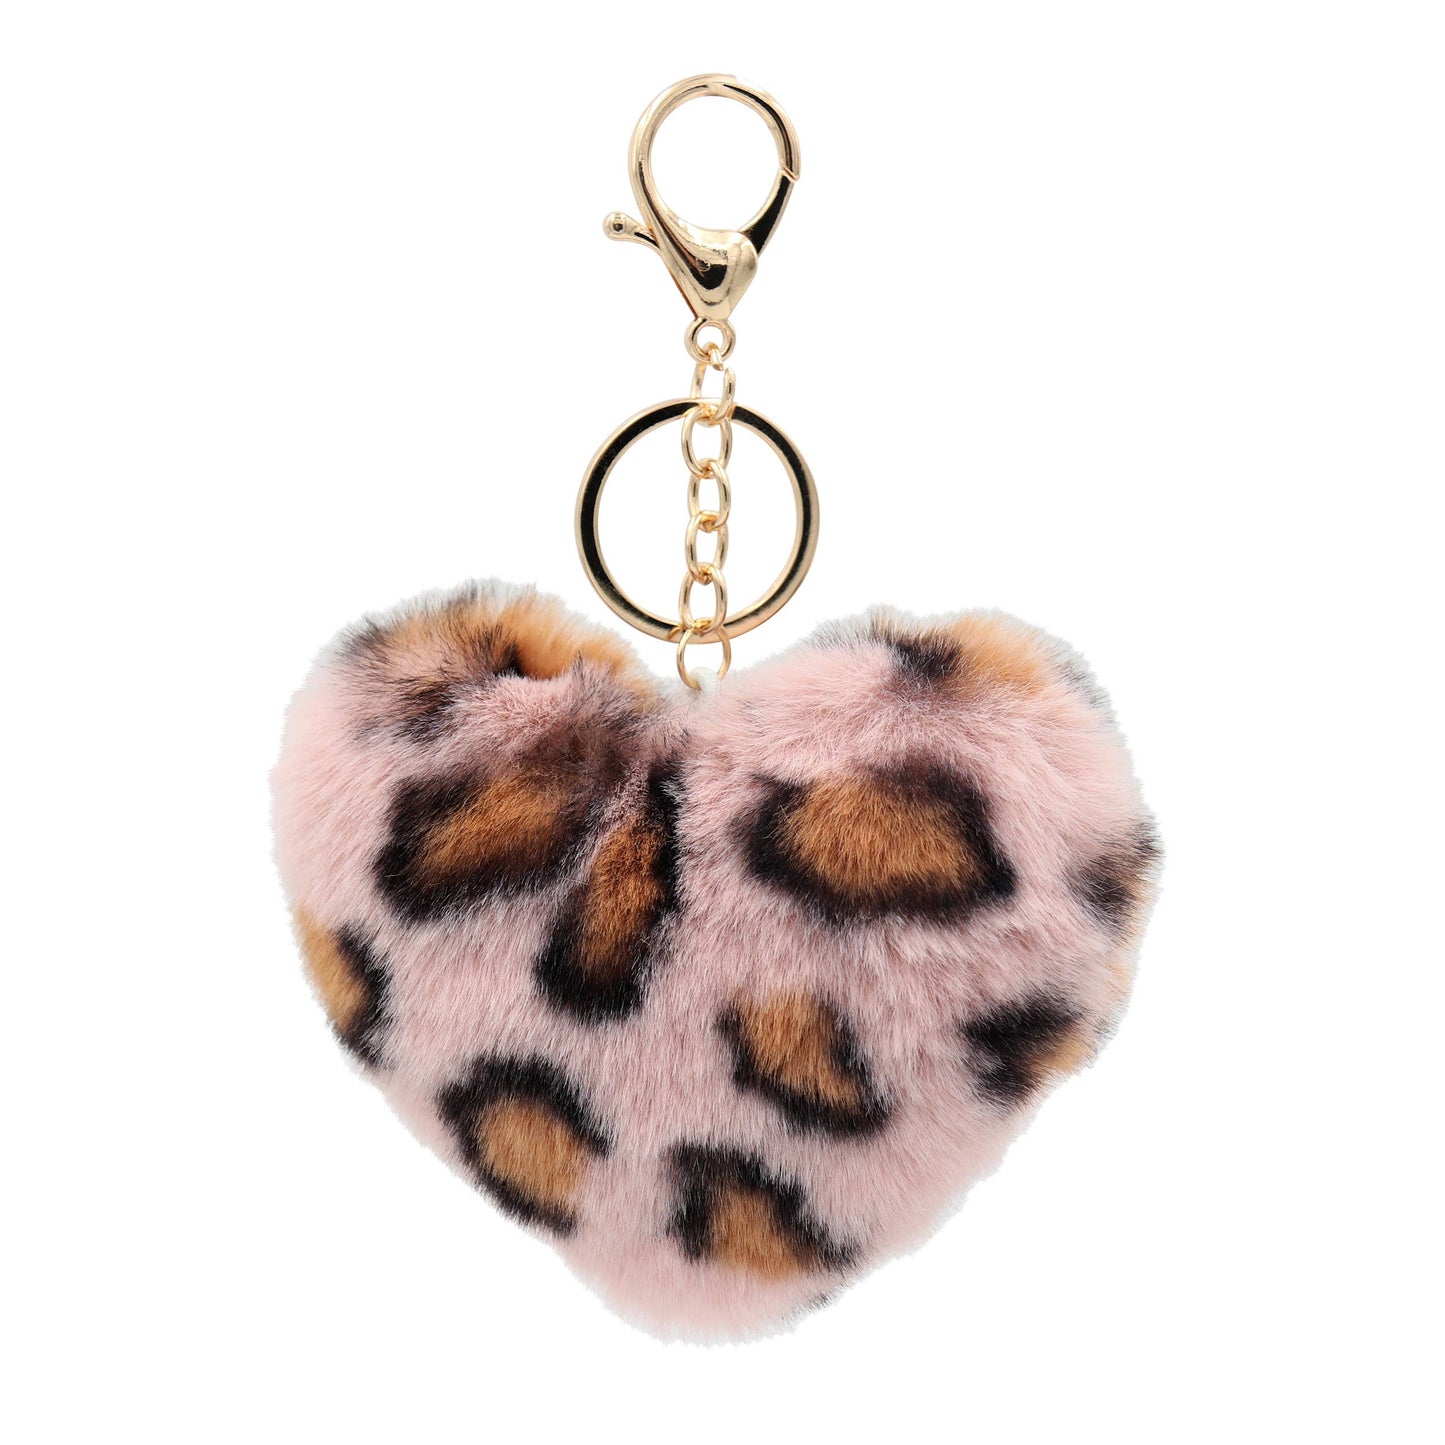 Image of Real Sic Pink Leopard Pom Pom Fuzzy  Heart Key Chain for girl's bag and purse